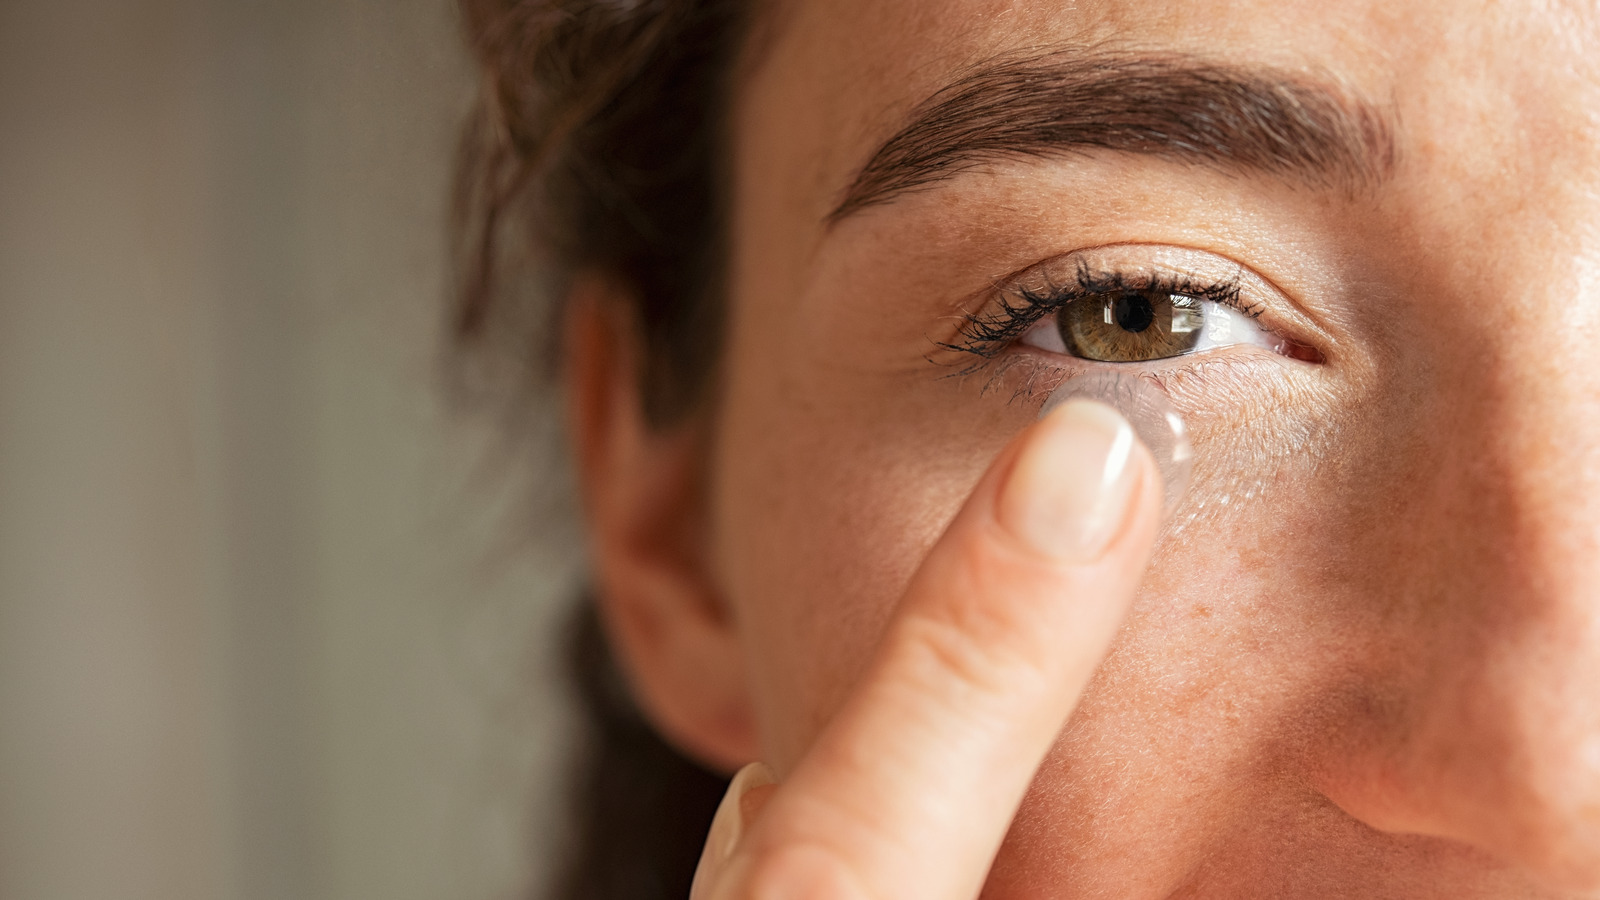 Why You Should Think Twice Before Wearing Expired Contacts